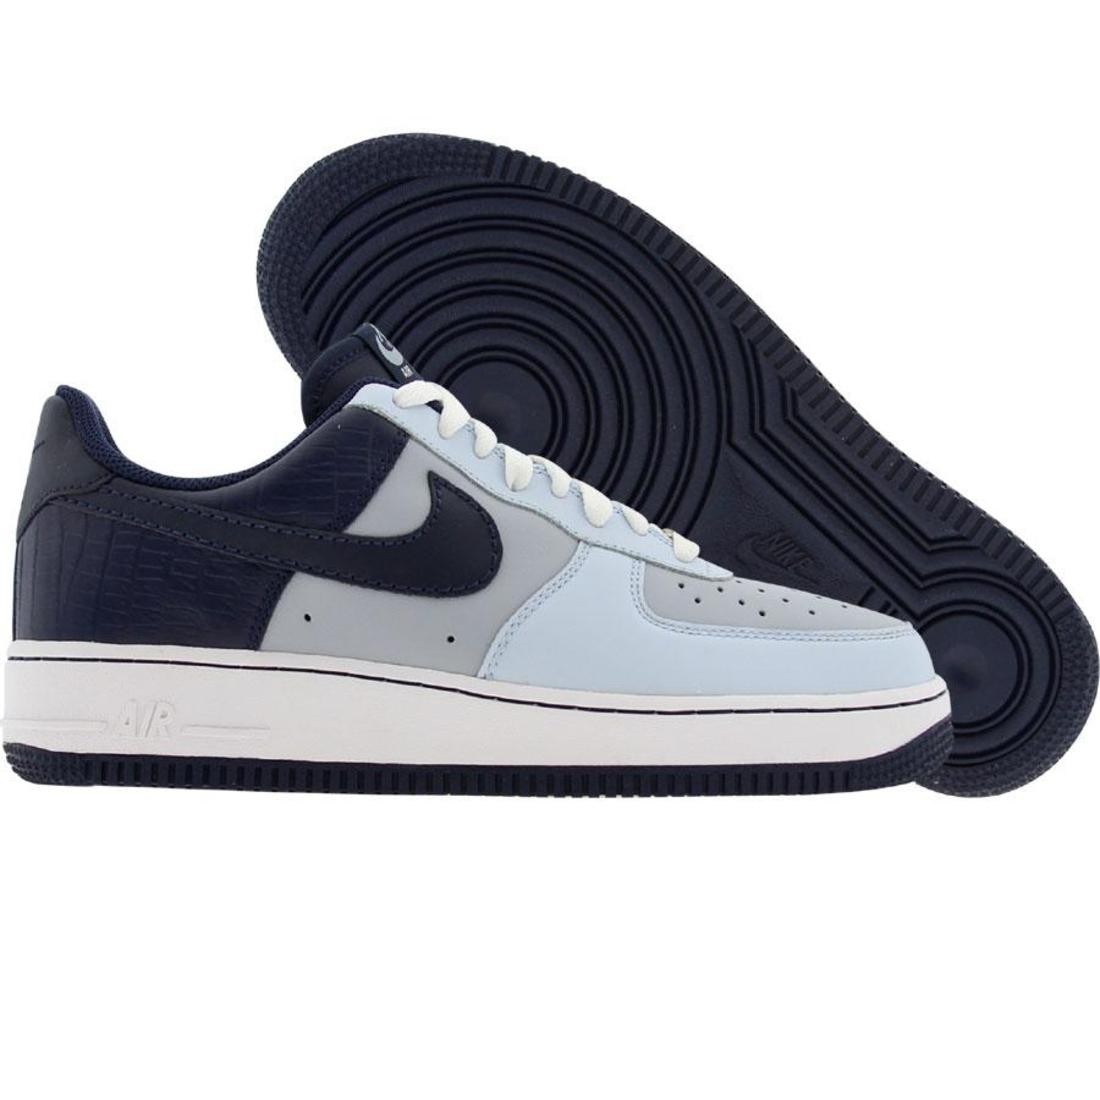 Nike Womens Air Force 1 07 Low (mist blue / midnight navy / blue ice)